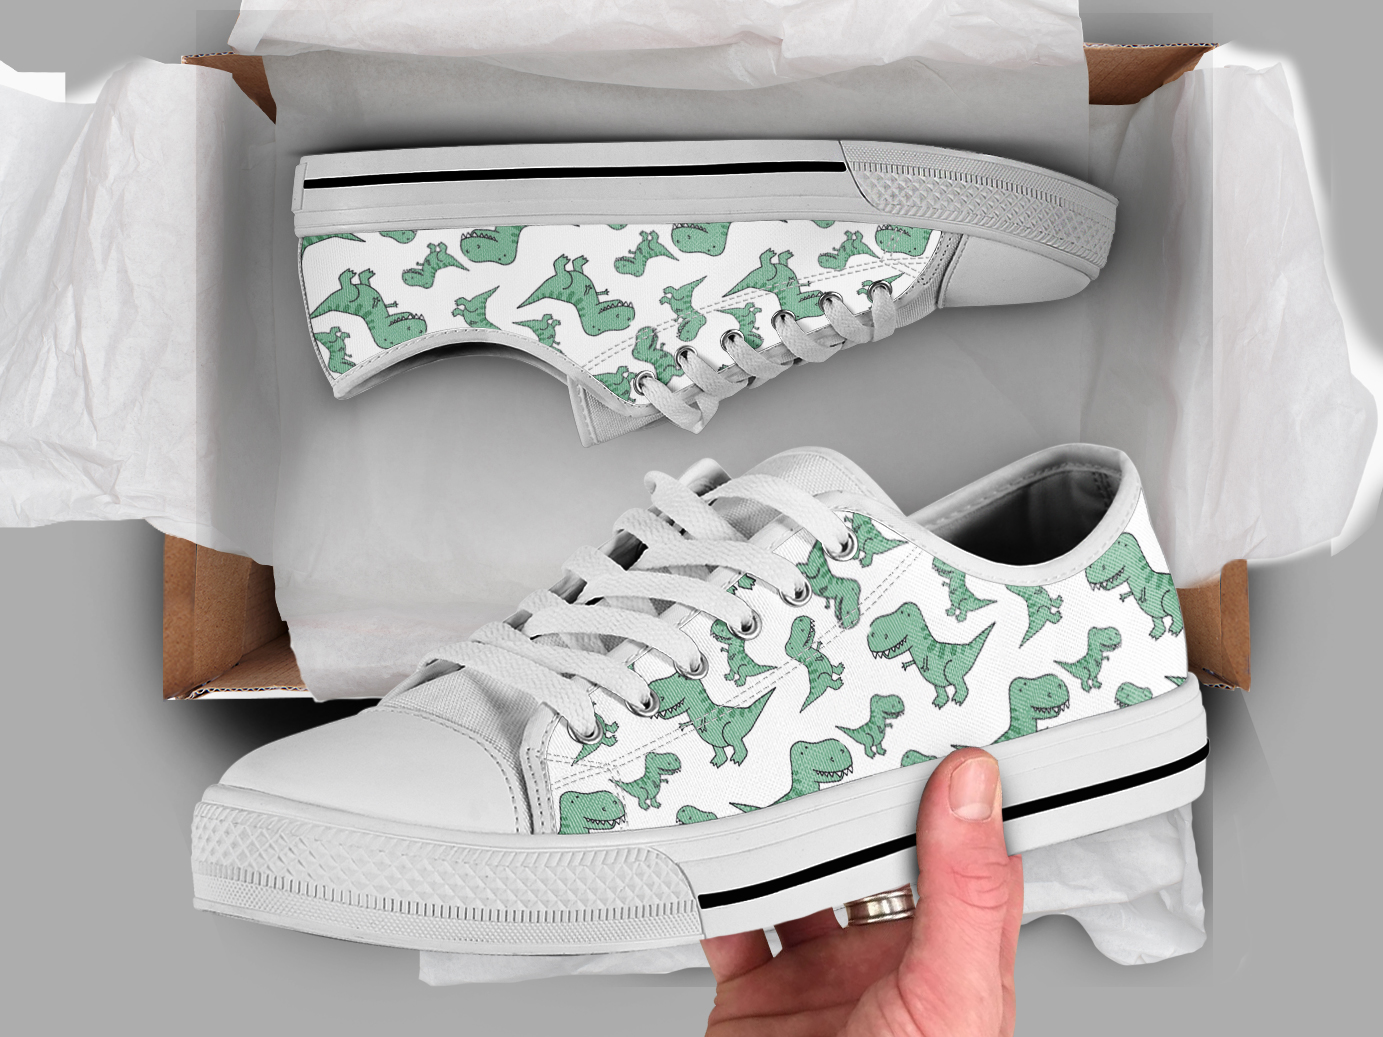 Green Dinosaur Shoes | Custom Low Tops Sneakers For Kids & Adults